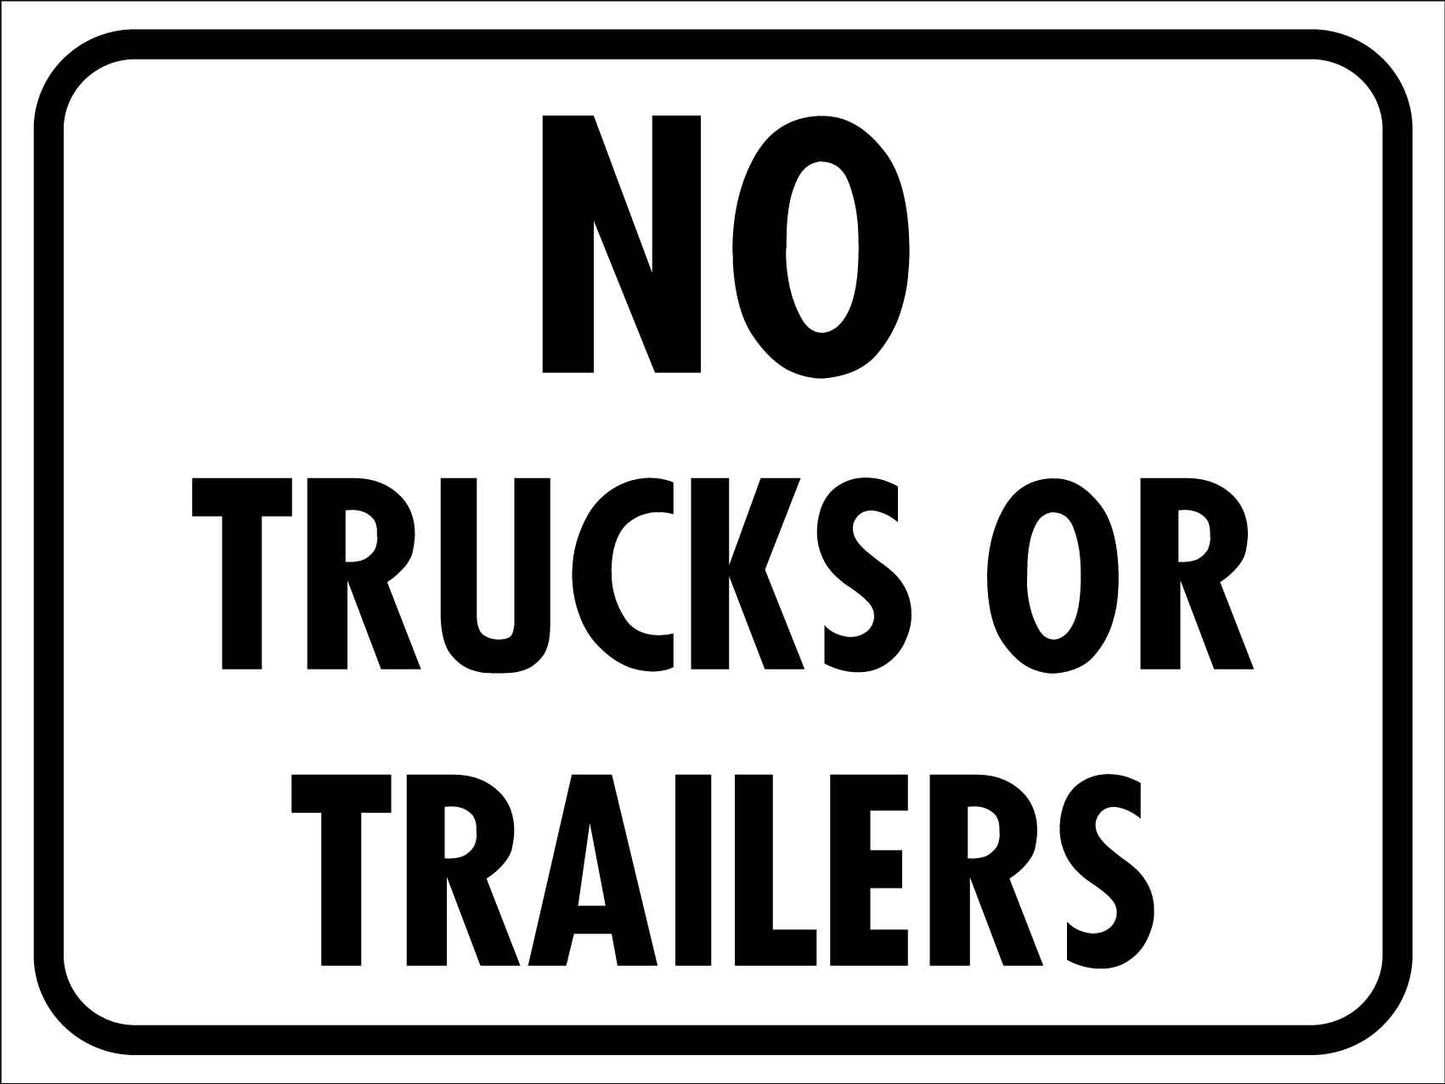 No Trucks or Trailers Sign